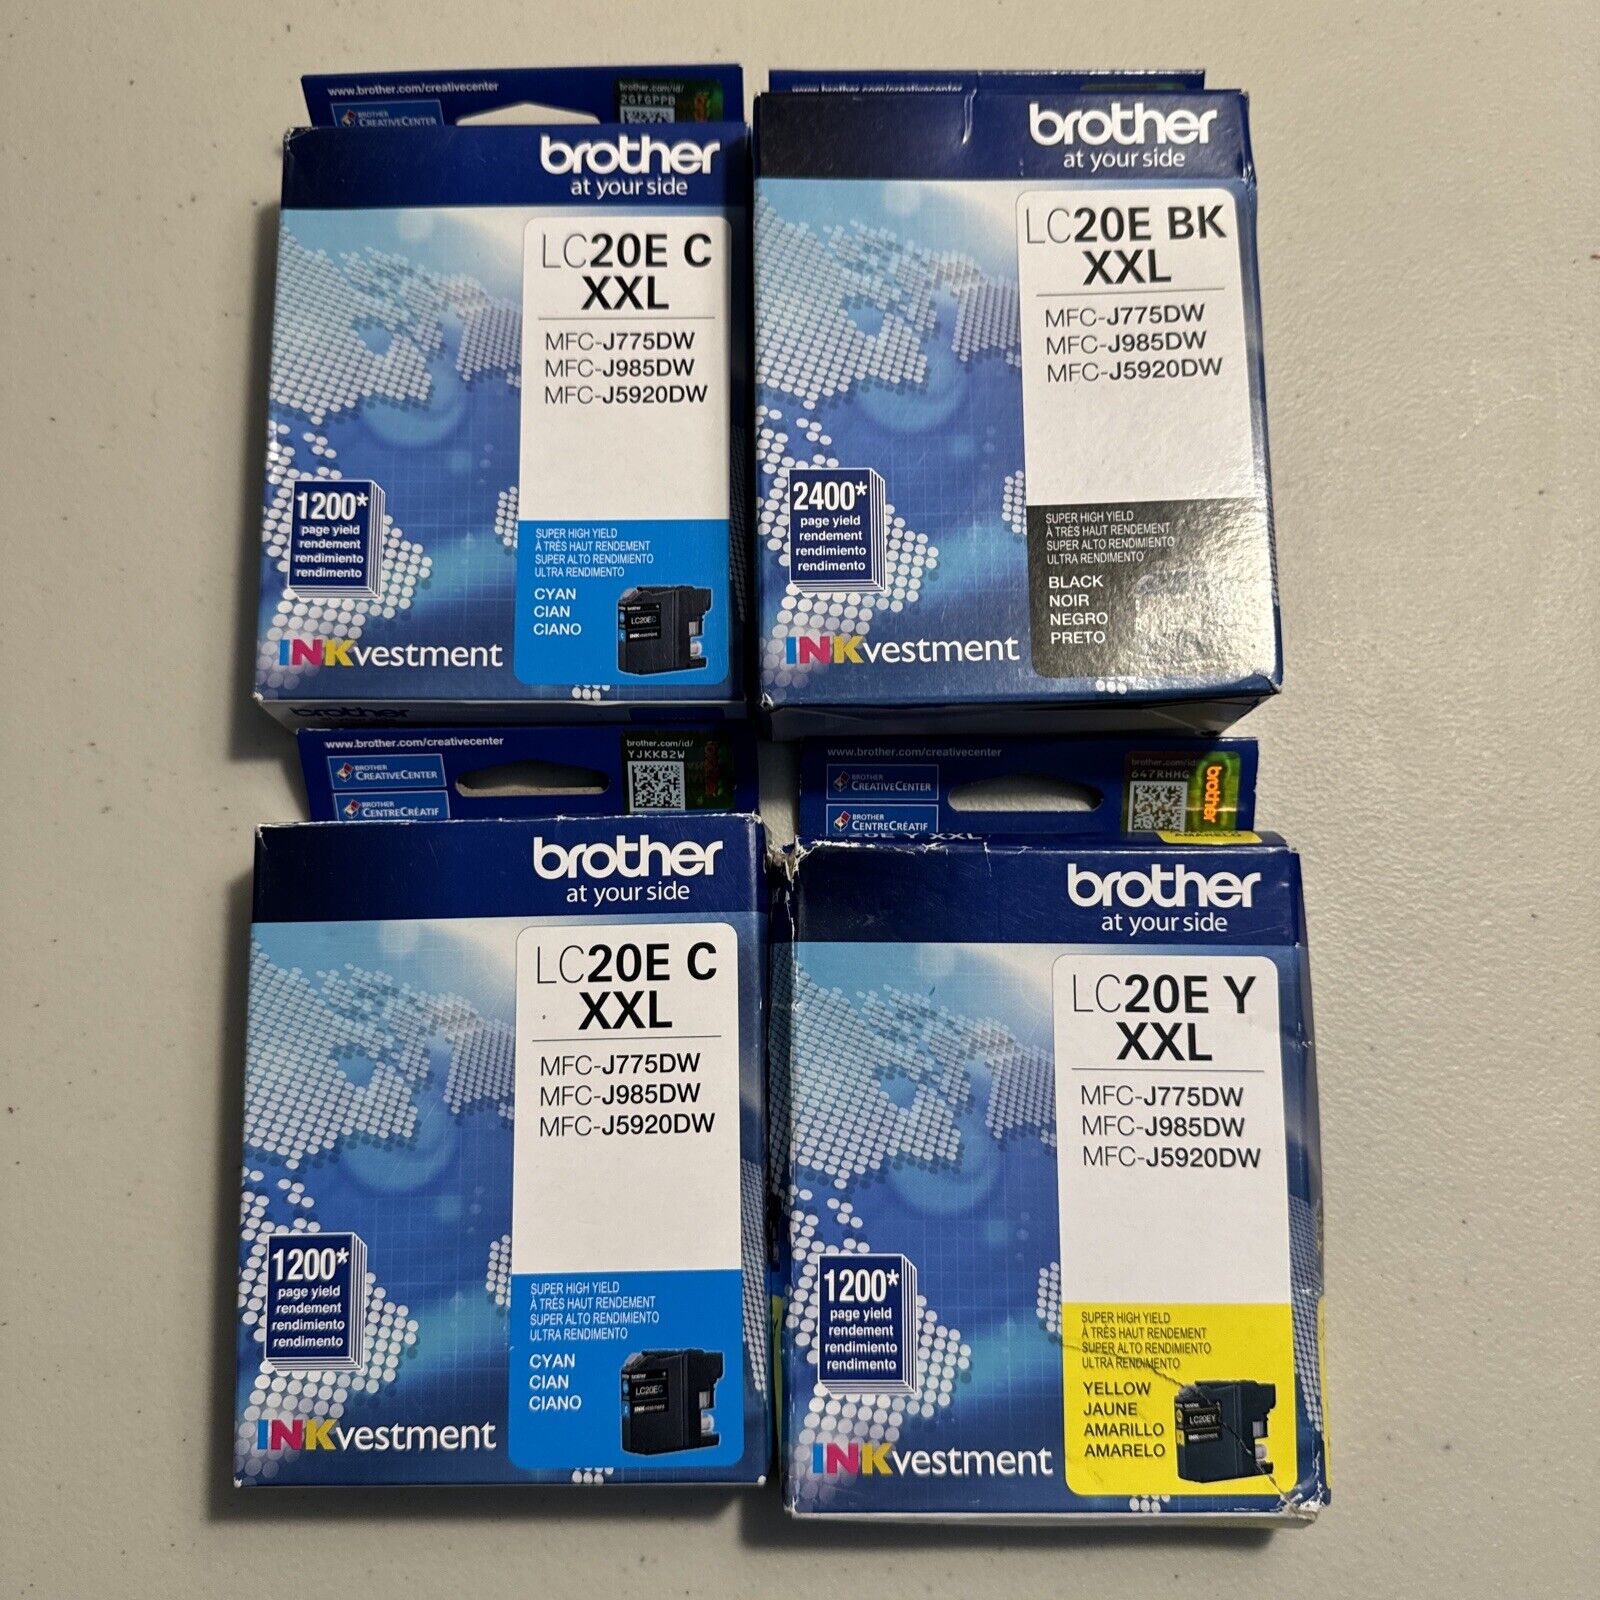 brother lc20e C XXL  ink cartridges Bundle Expired 1/23 3/24